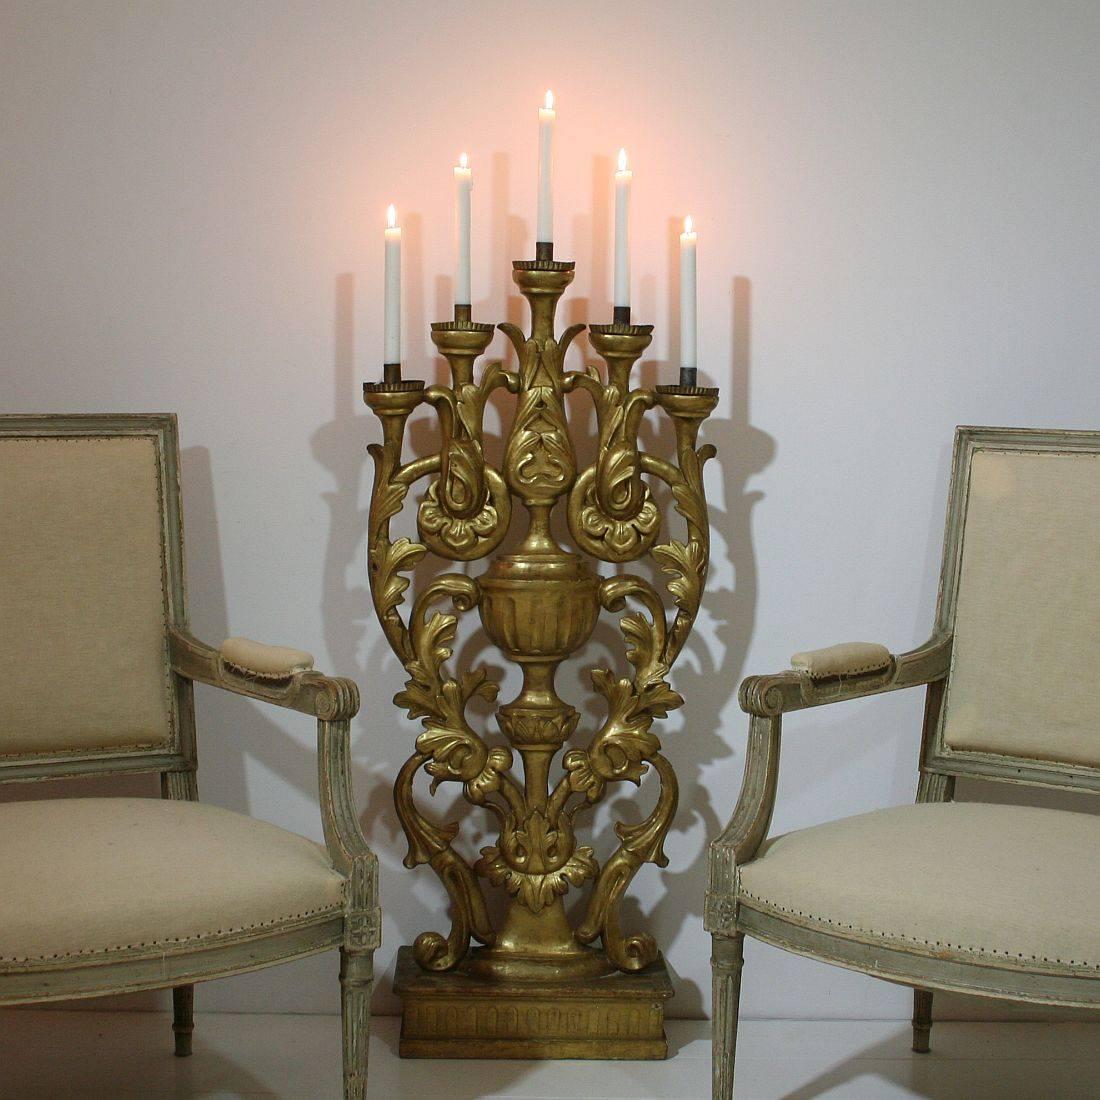 Unique Baroque style giltwood candleholder for five candles, Italy, circa 1850.
Weathered, small losses and old repairs. More pictures are available on request.